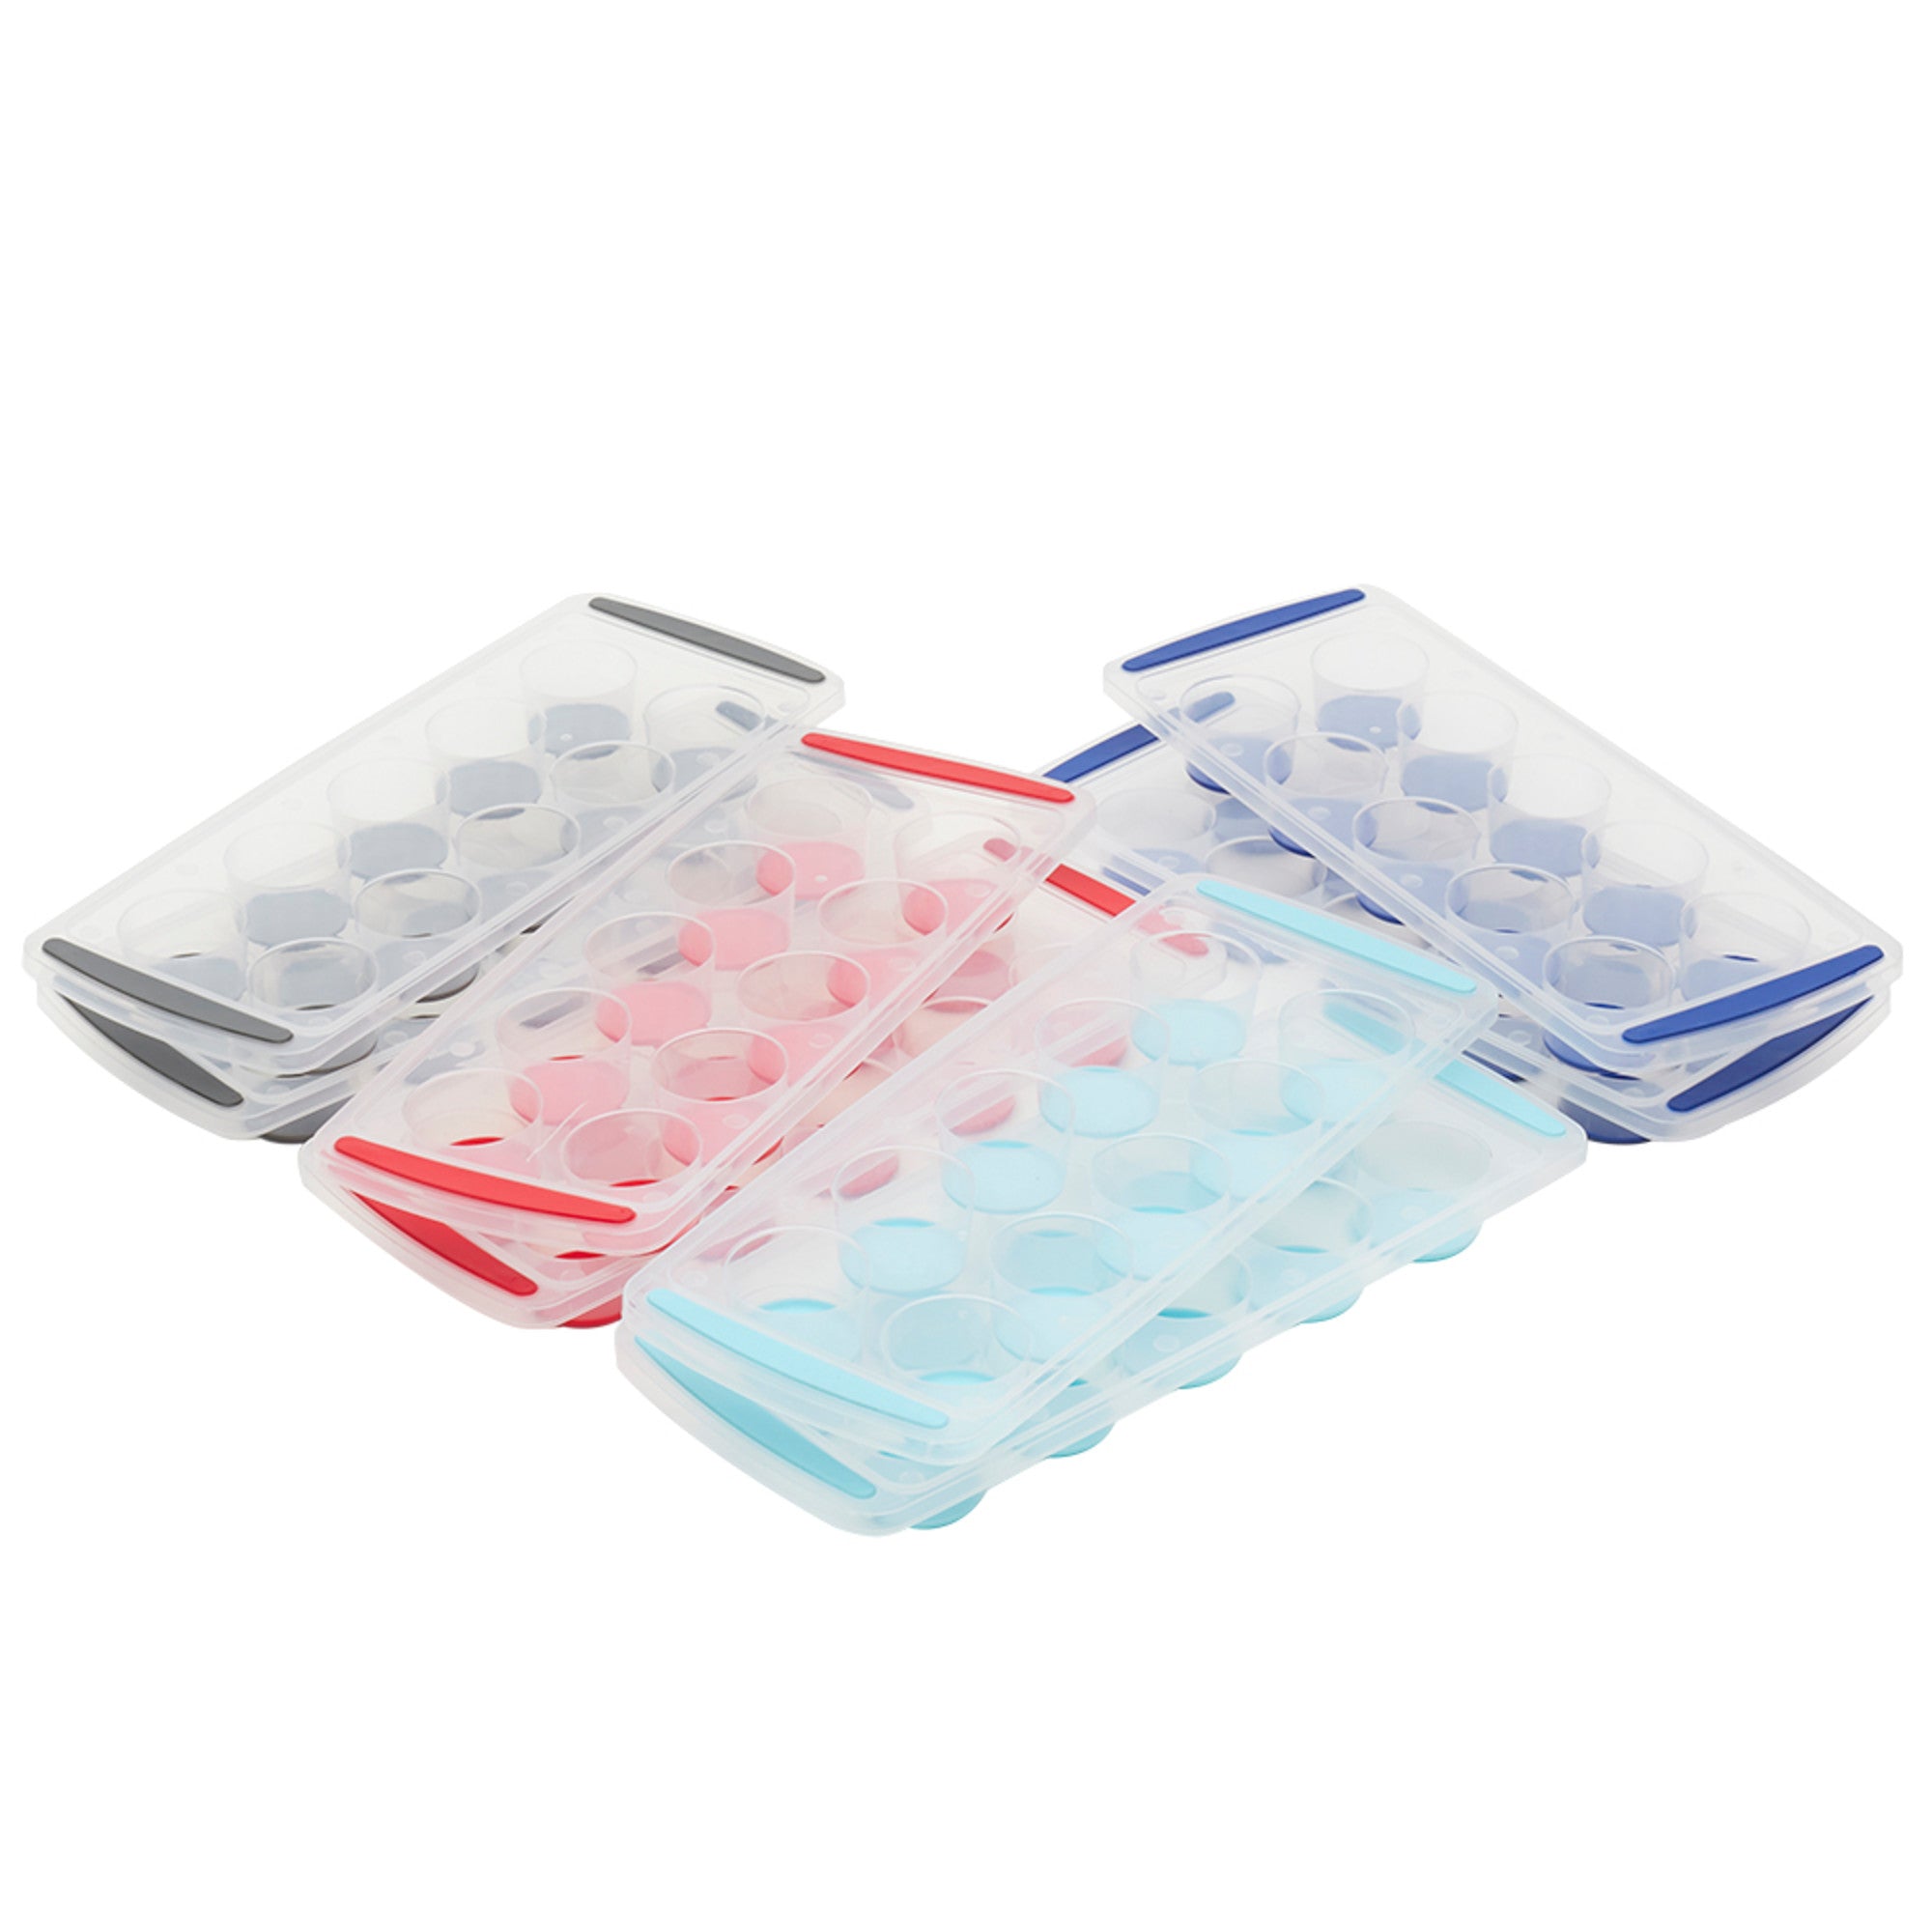 Stackable Ice Cube Trays (21 Cubes)